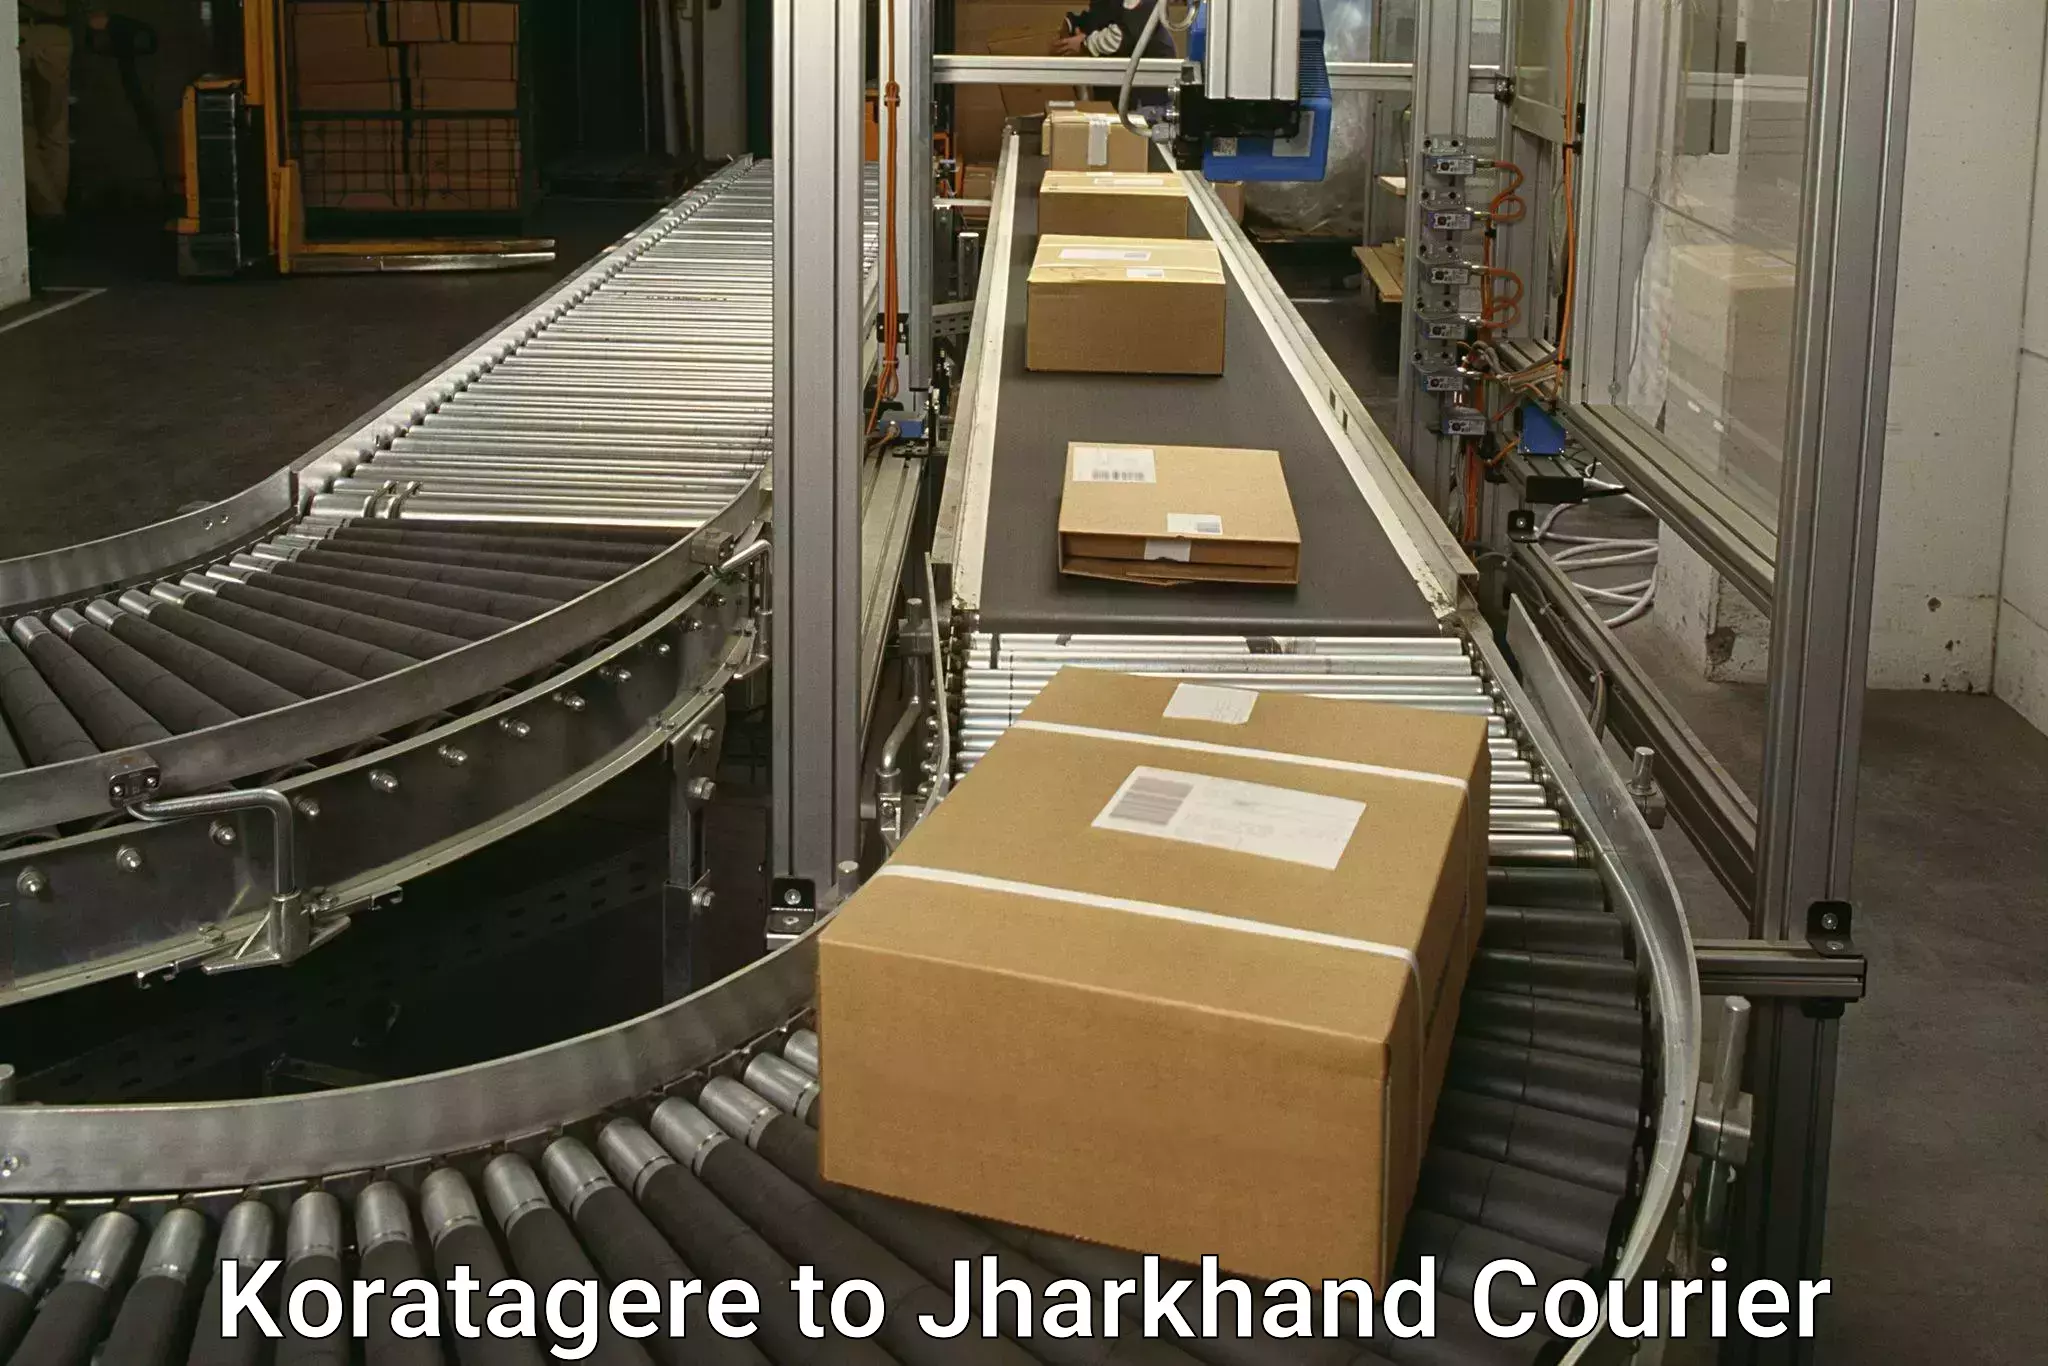 Courier service booking Koratagere to Jharkhand